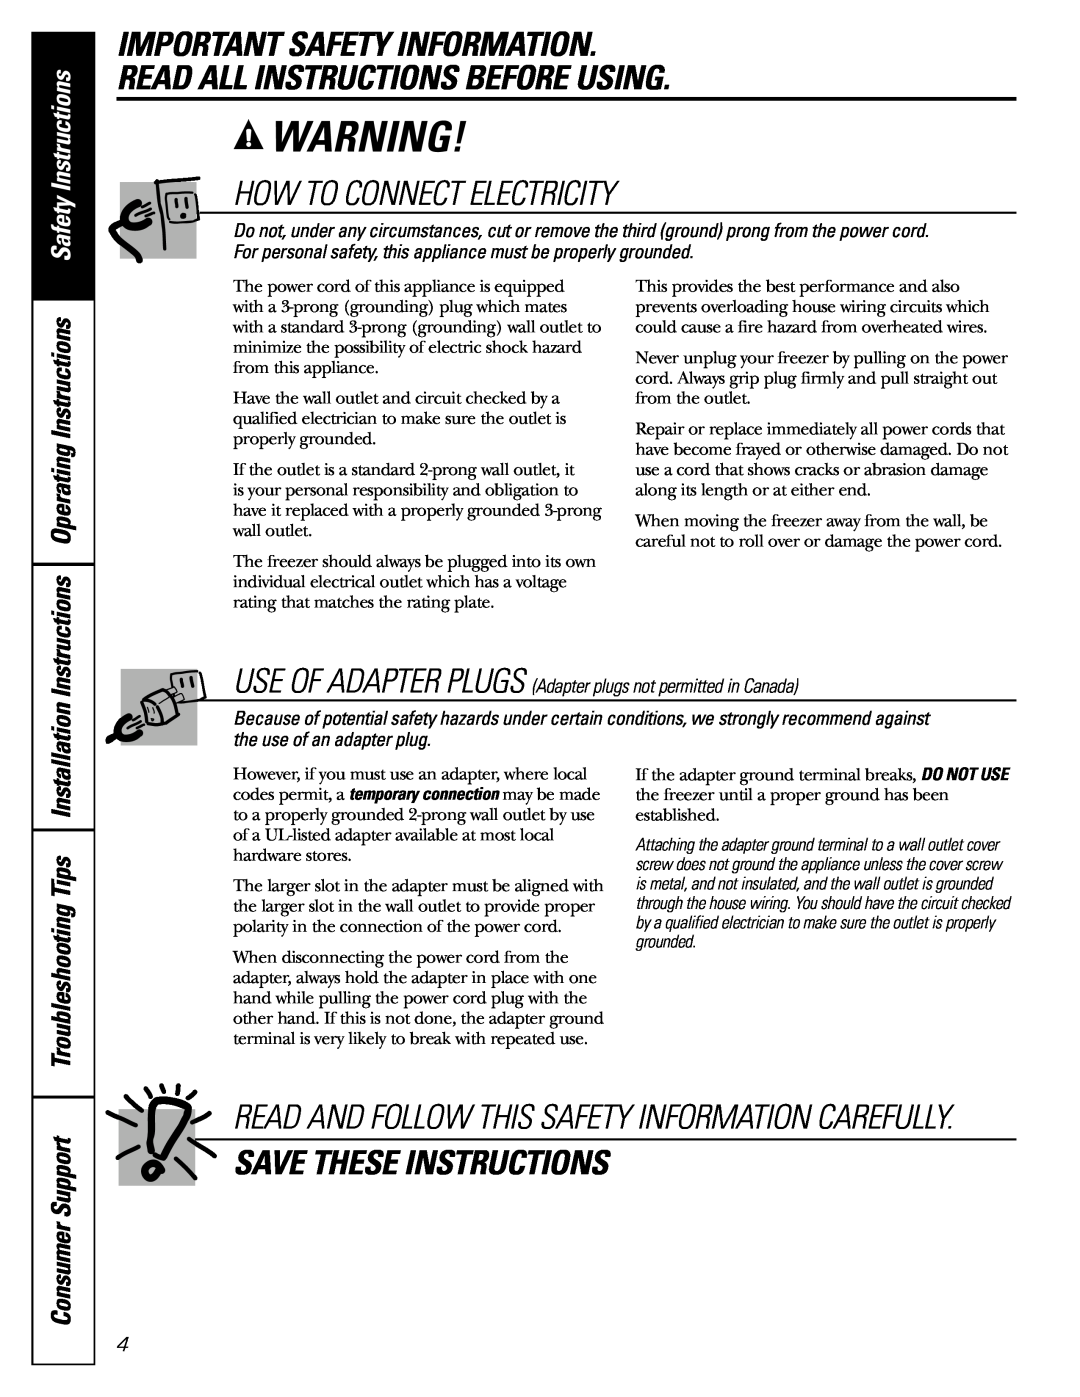 GE FCM5 How To Connect Electricity, Save These Instructions, Troubleshooting Tips, Consumer Support, Safety Instructions 